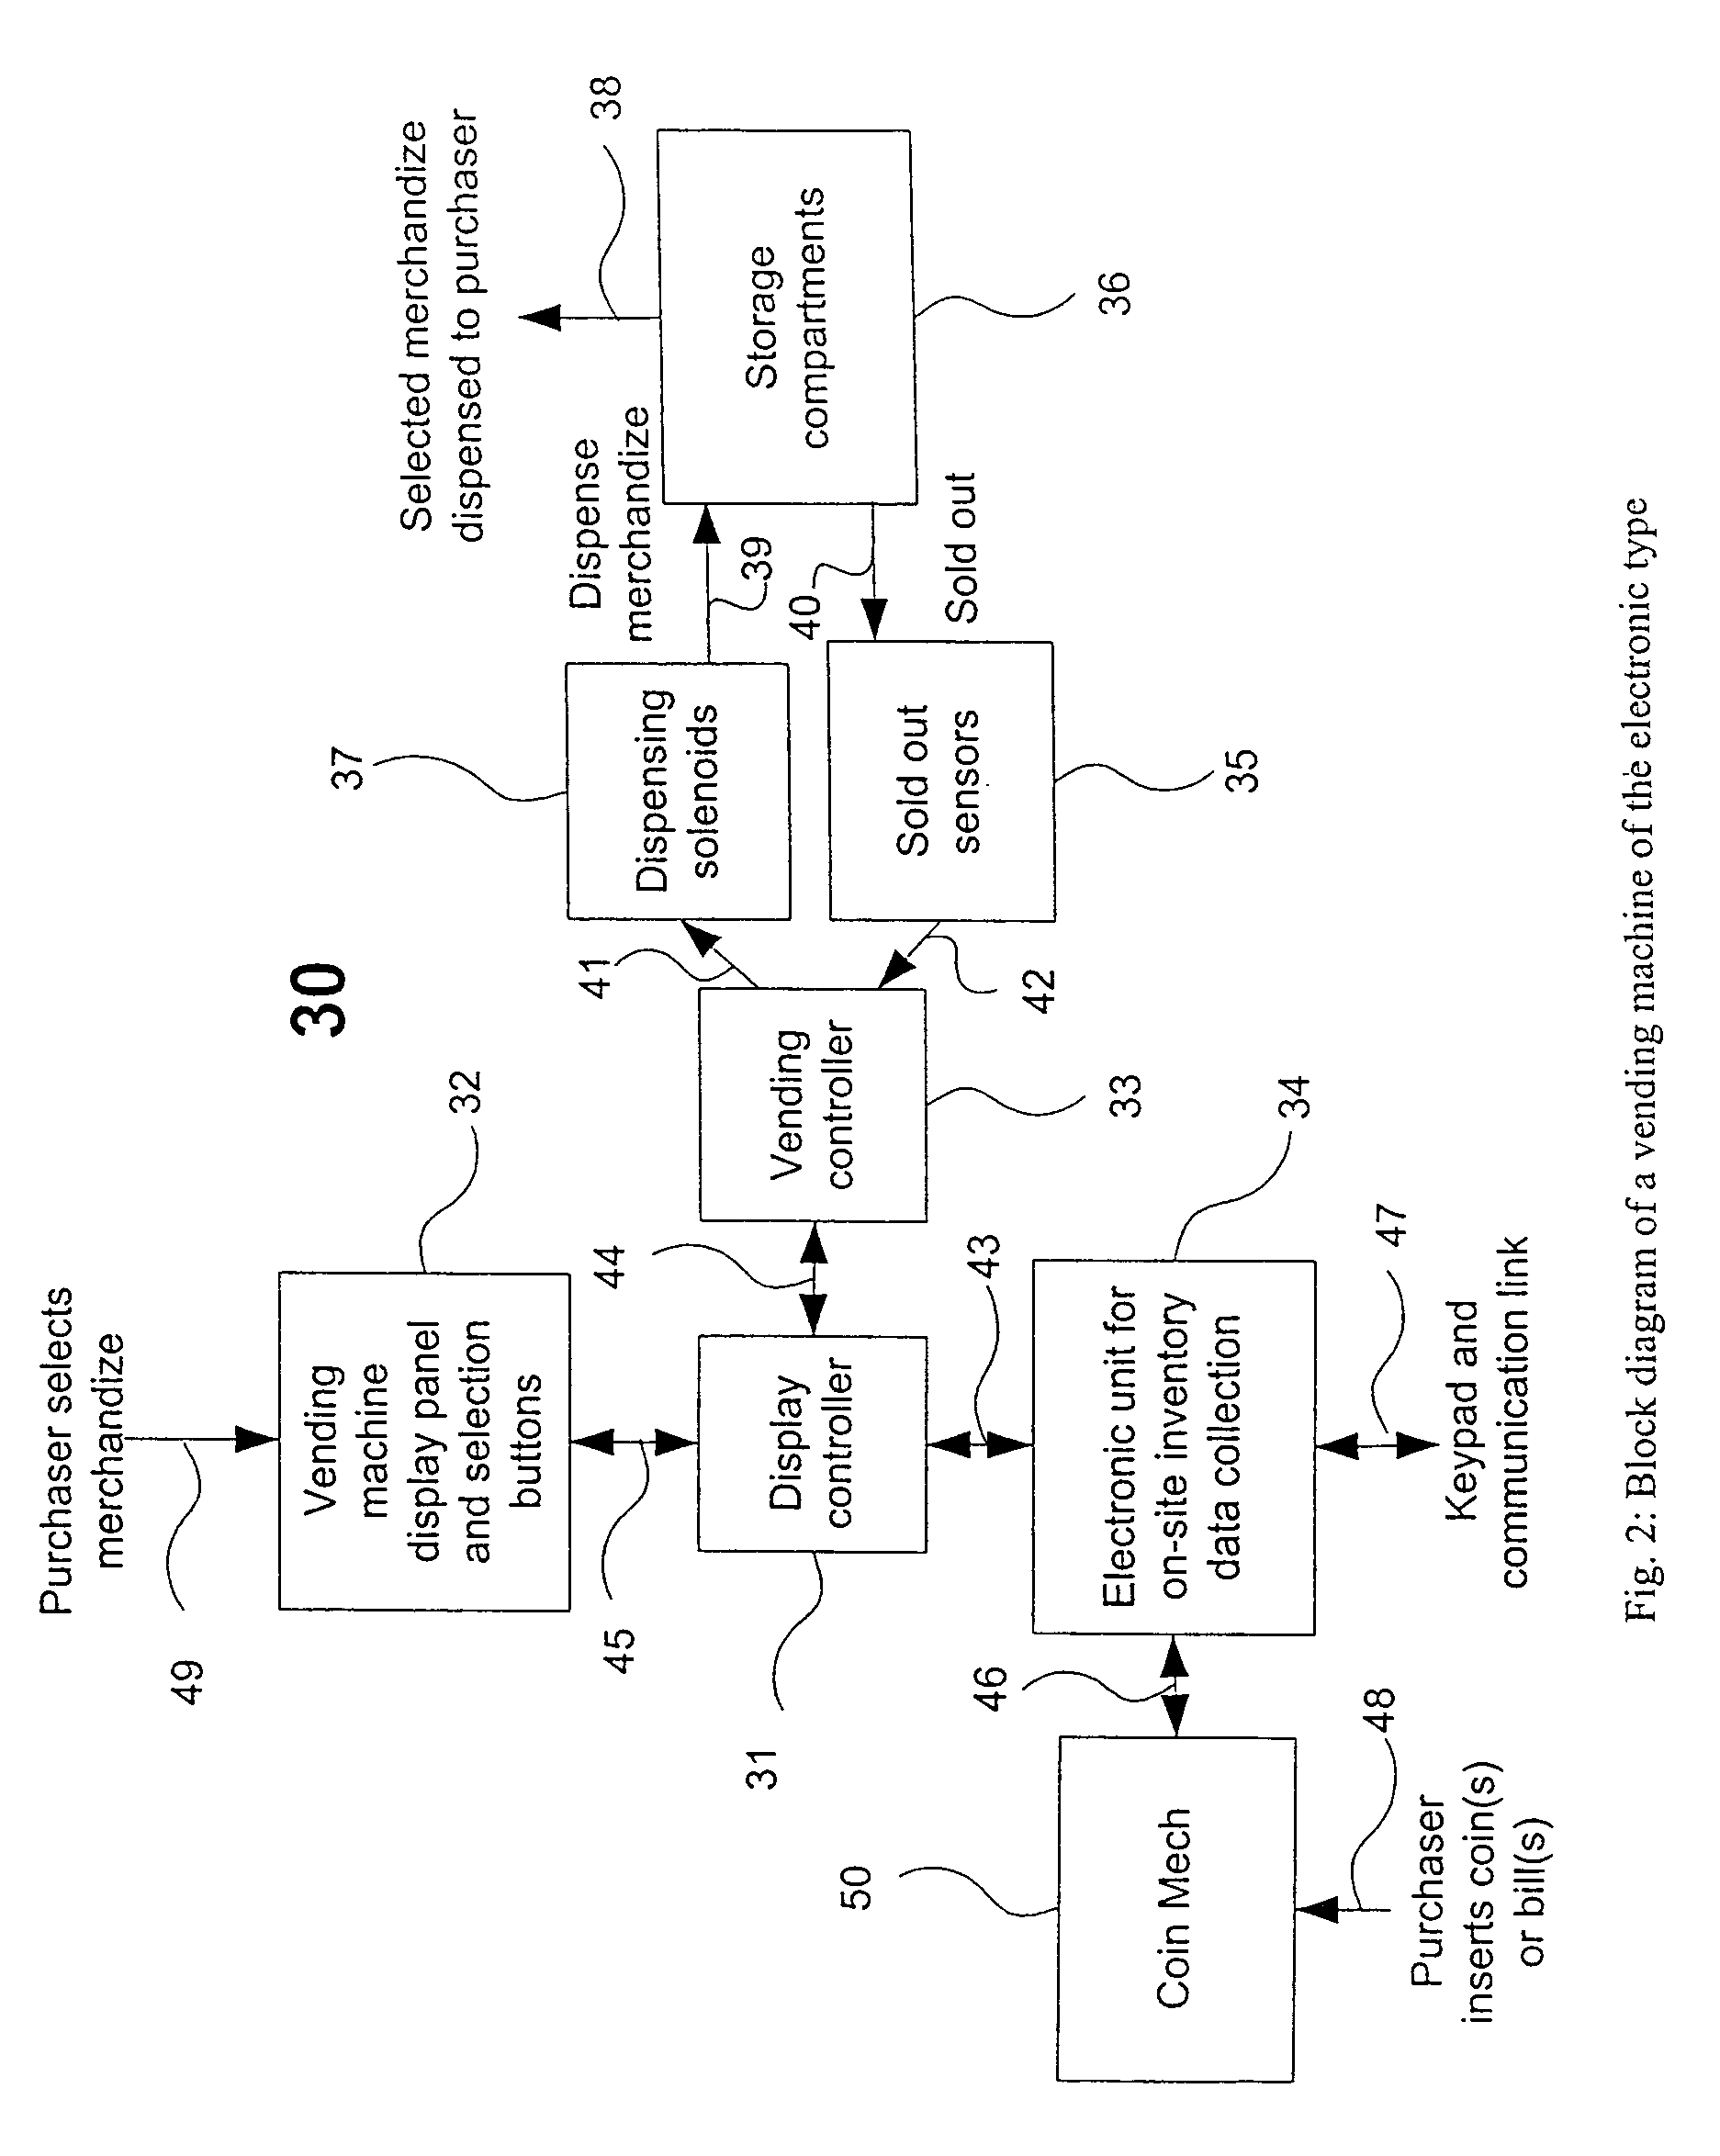 Wireless purchase and on-line inventory apparatus and method for vending machines